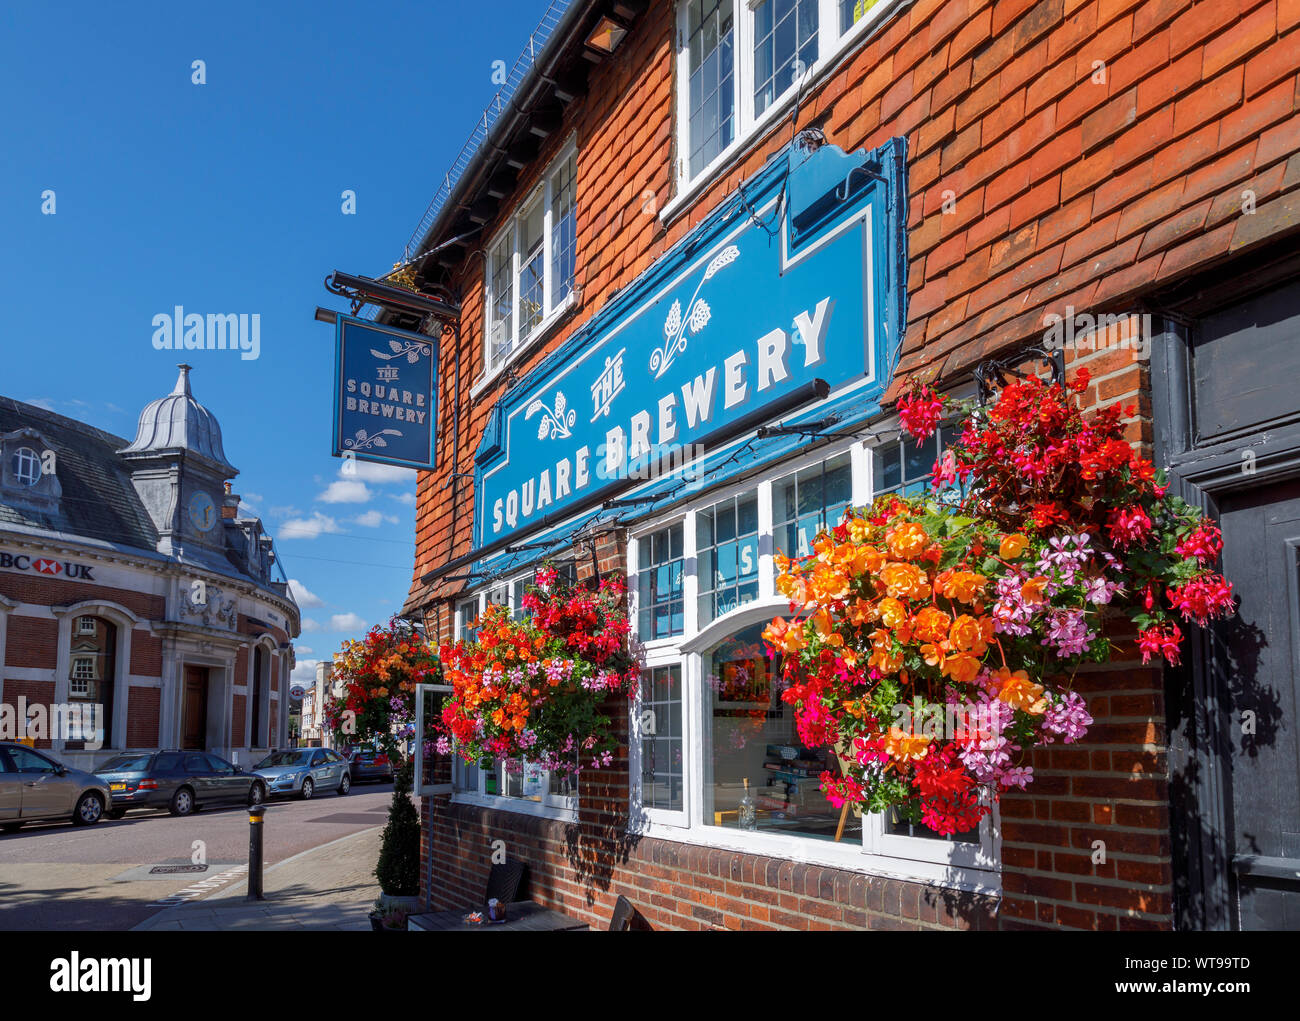 The Square Brewery decorated with pretty hanging baskets in the centre of the market town of Petersfield, Hampshire, southern England, UK Stock Photo